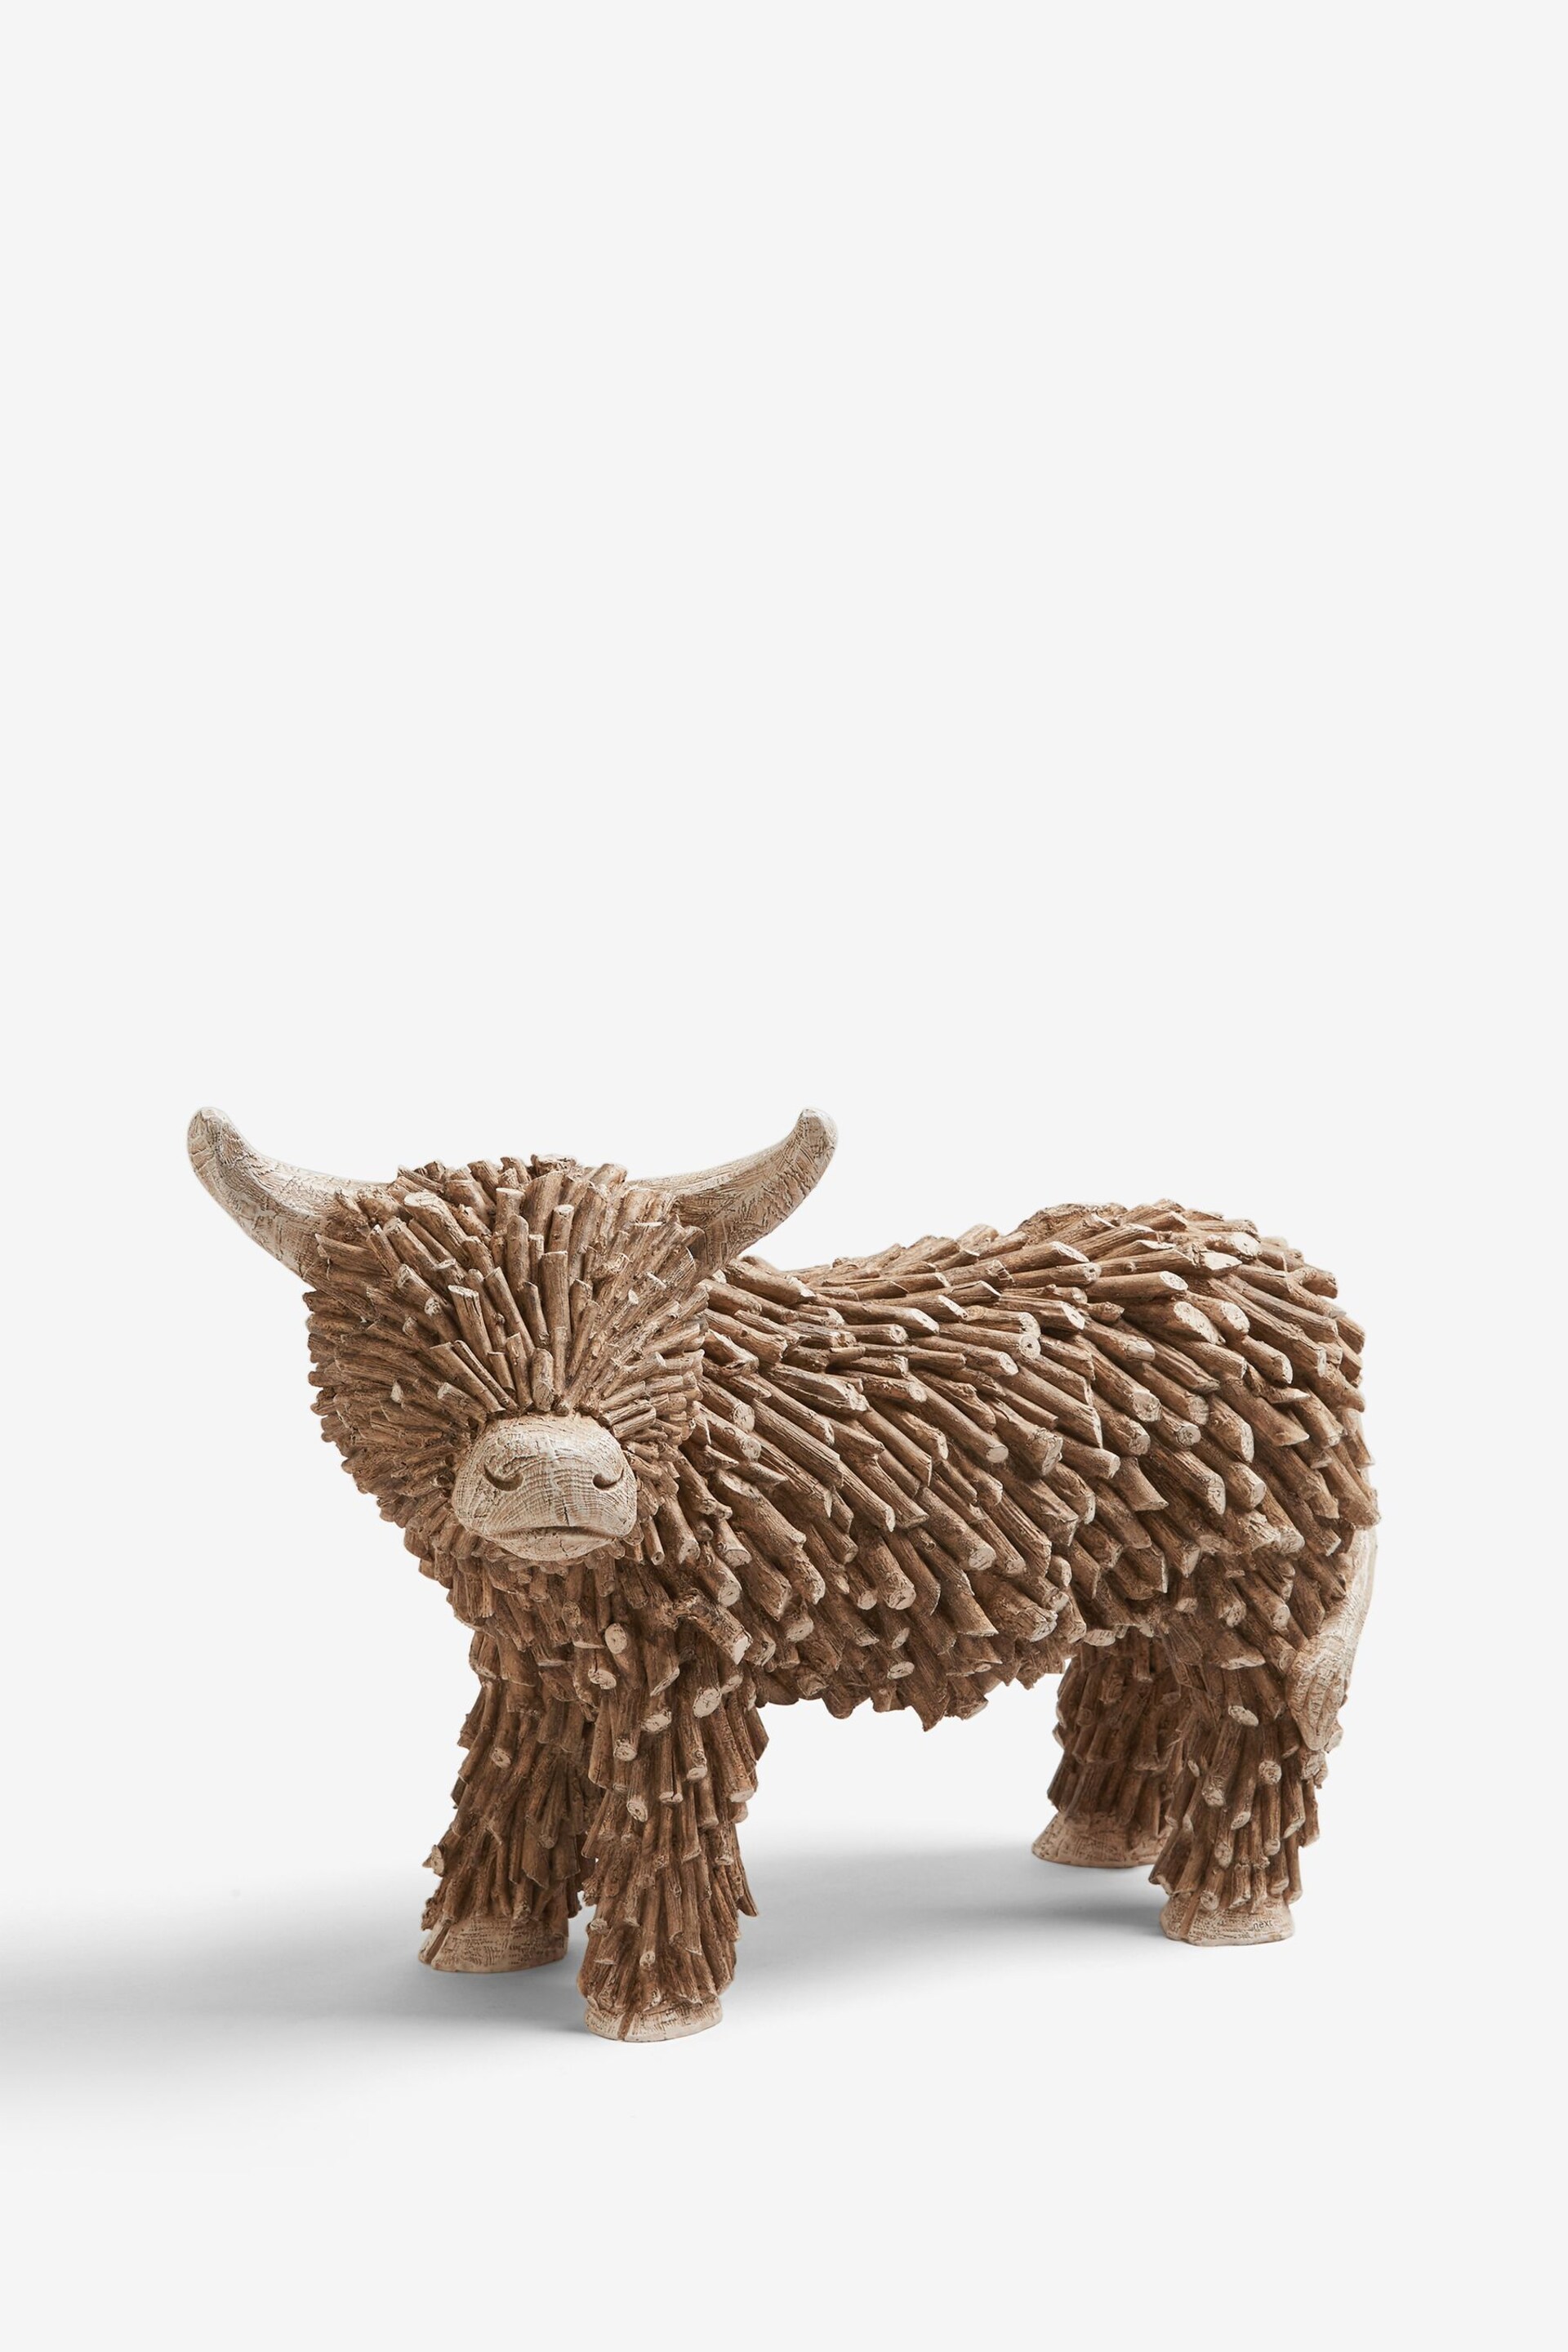 Brown Hamish the Highland Extra Large Ornament Cow - Image 3 of 4